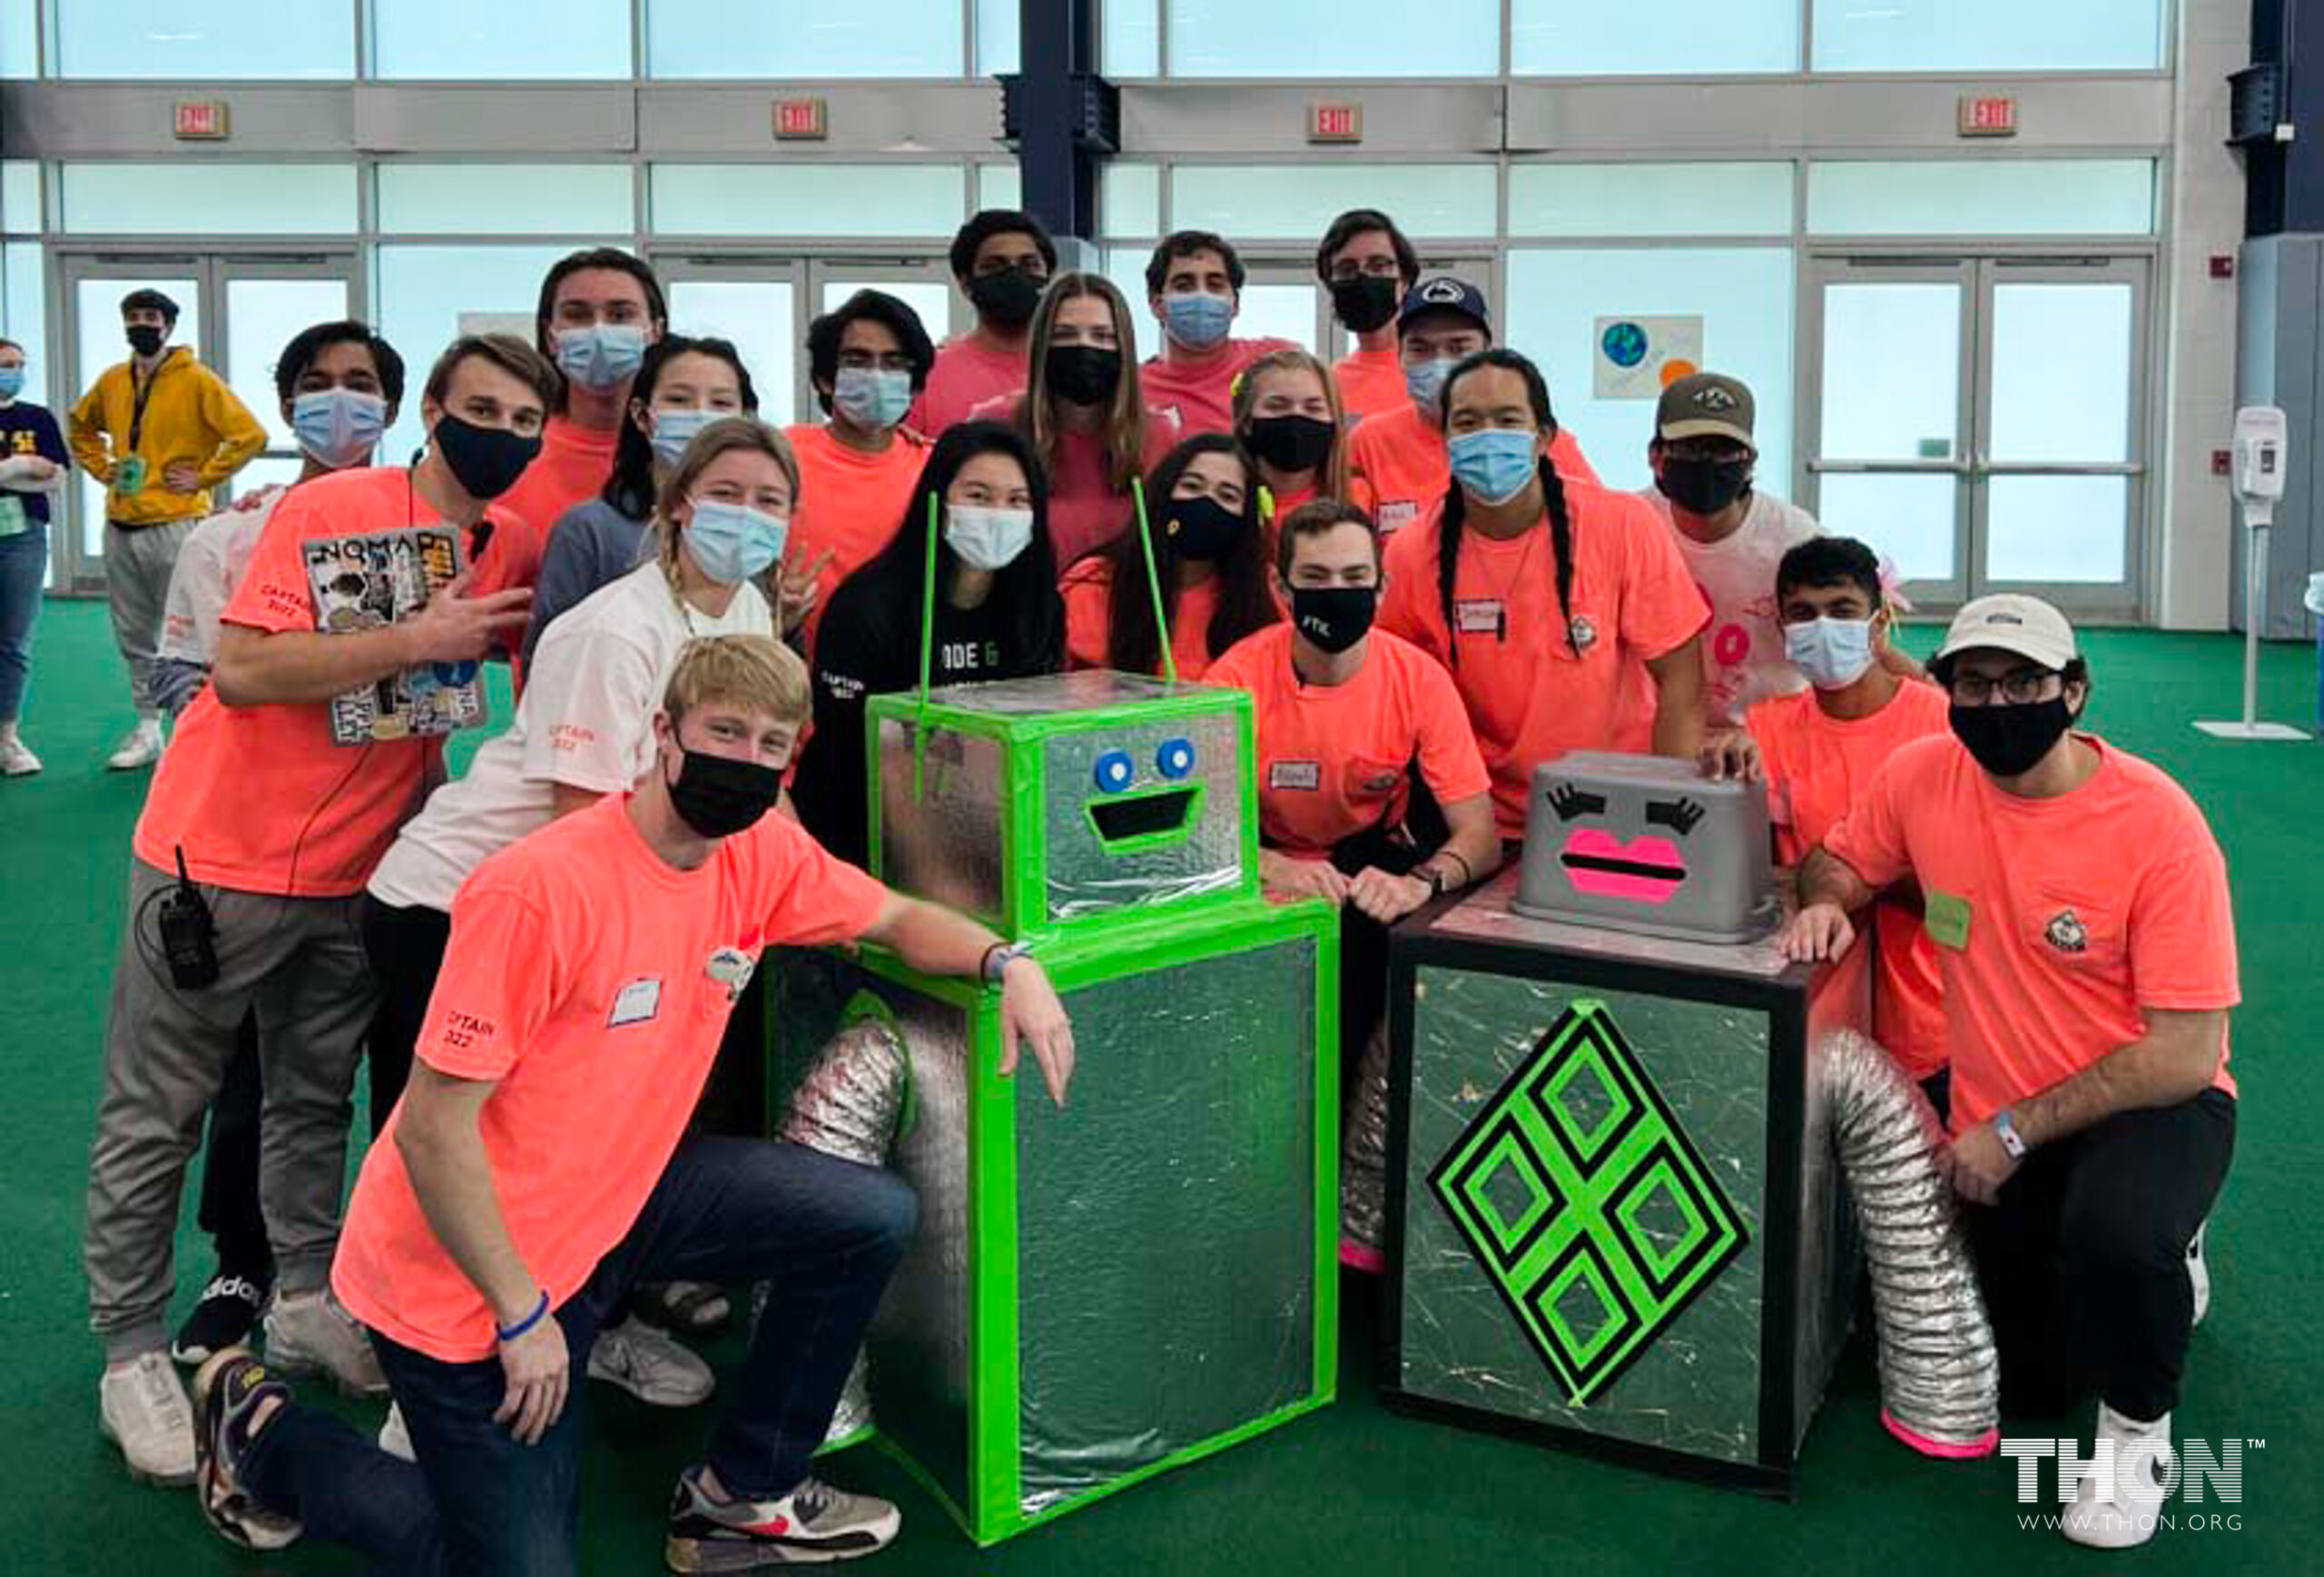 THON Technology Captains around BroBot and FemBot robot costumes